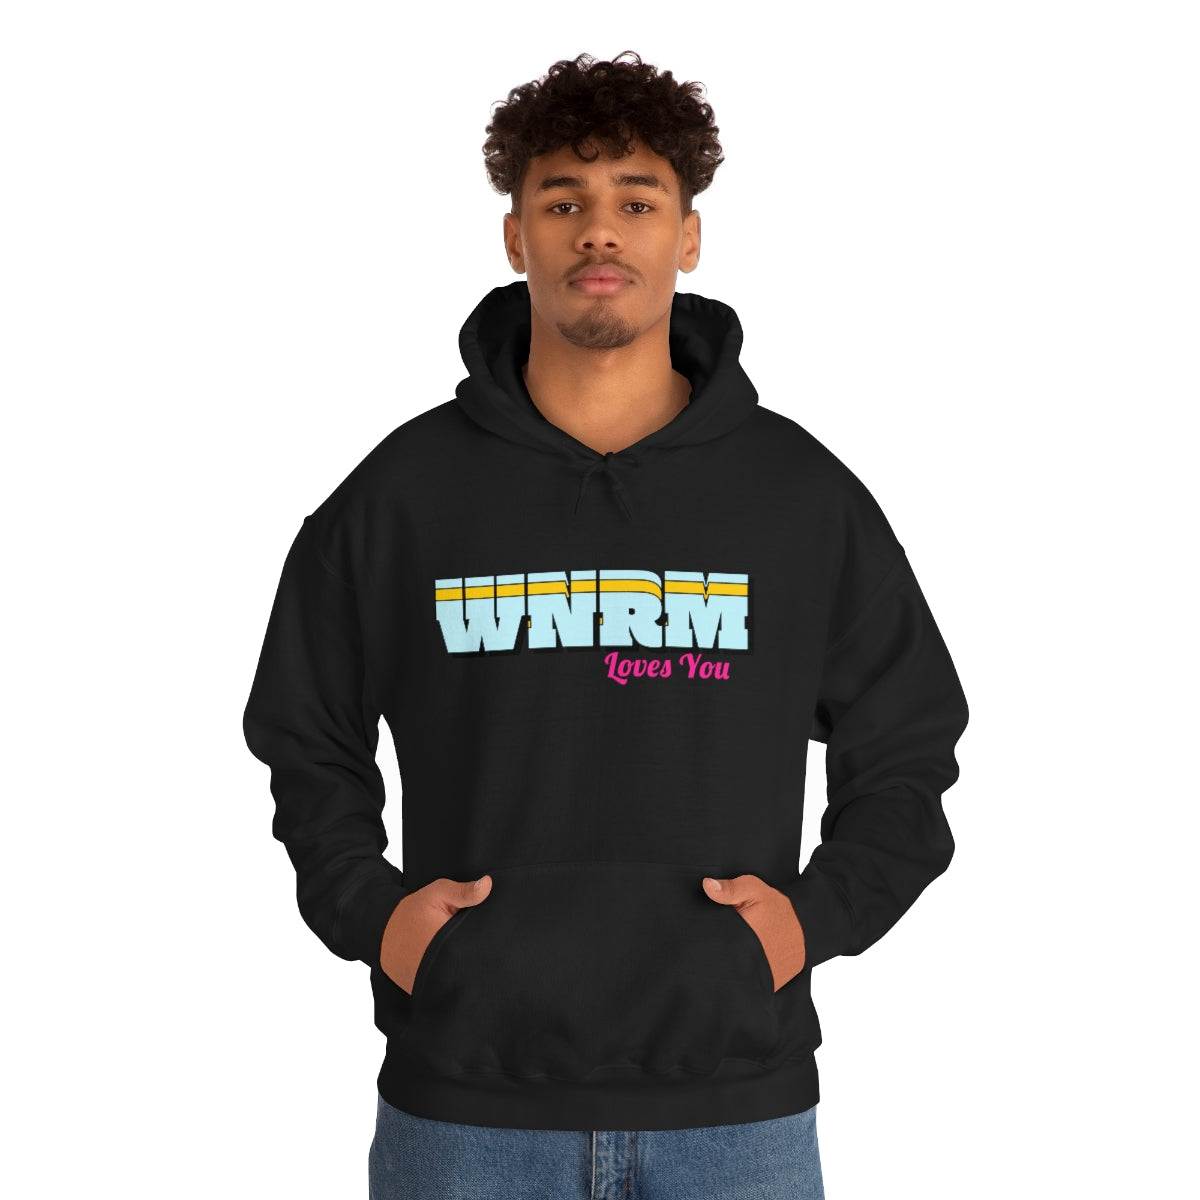 Boy wearing a WNRM Loves You Unisex Heavy Blend™ Hooded Sweatshirt, with a white background